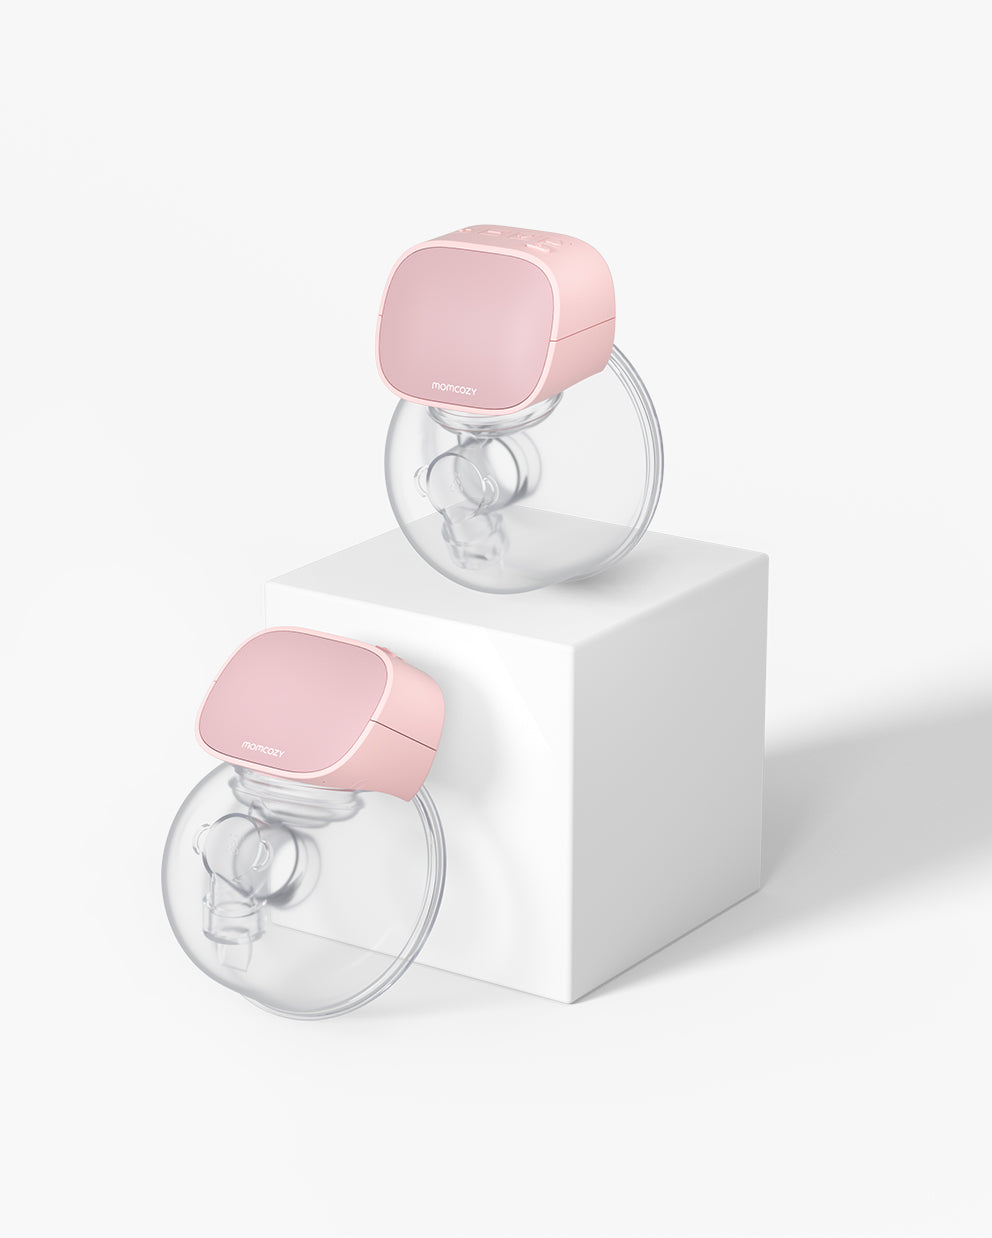 S9 - 2 Mode Wearable Electric Breast Pump